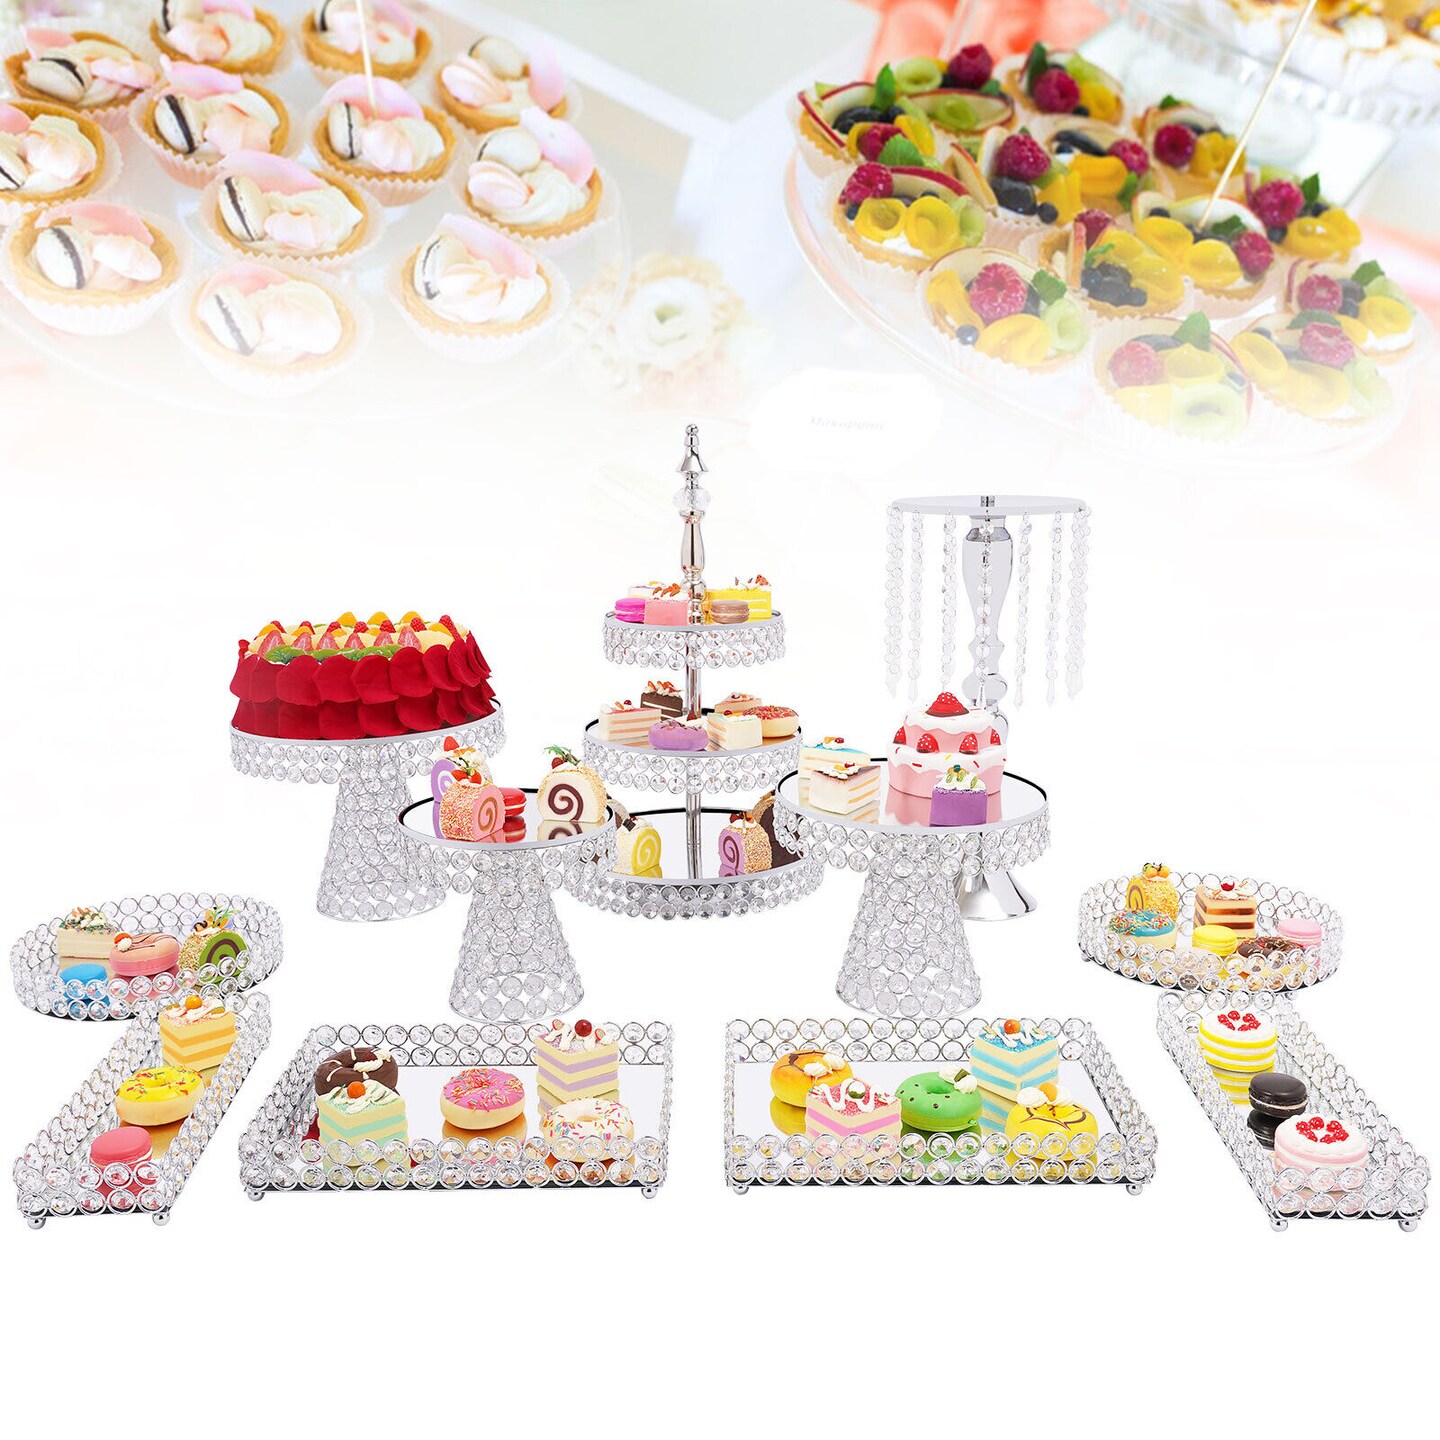 Kitcheniva Silver Dessert Tower Display Stands For Party And Events 11Pcs